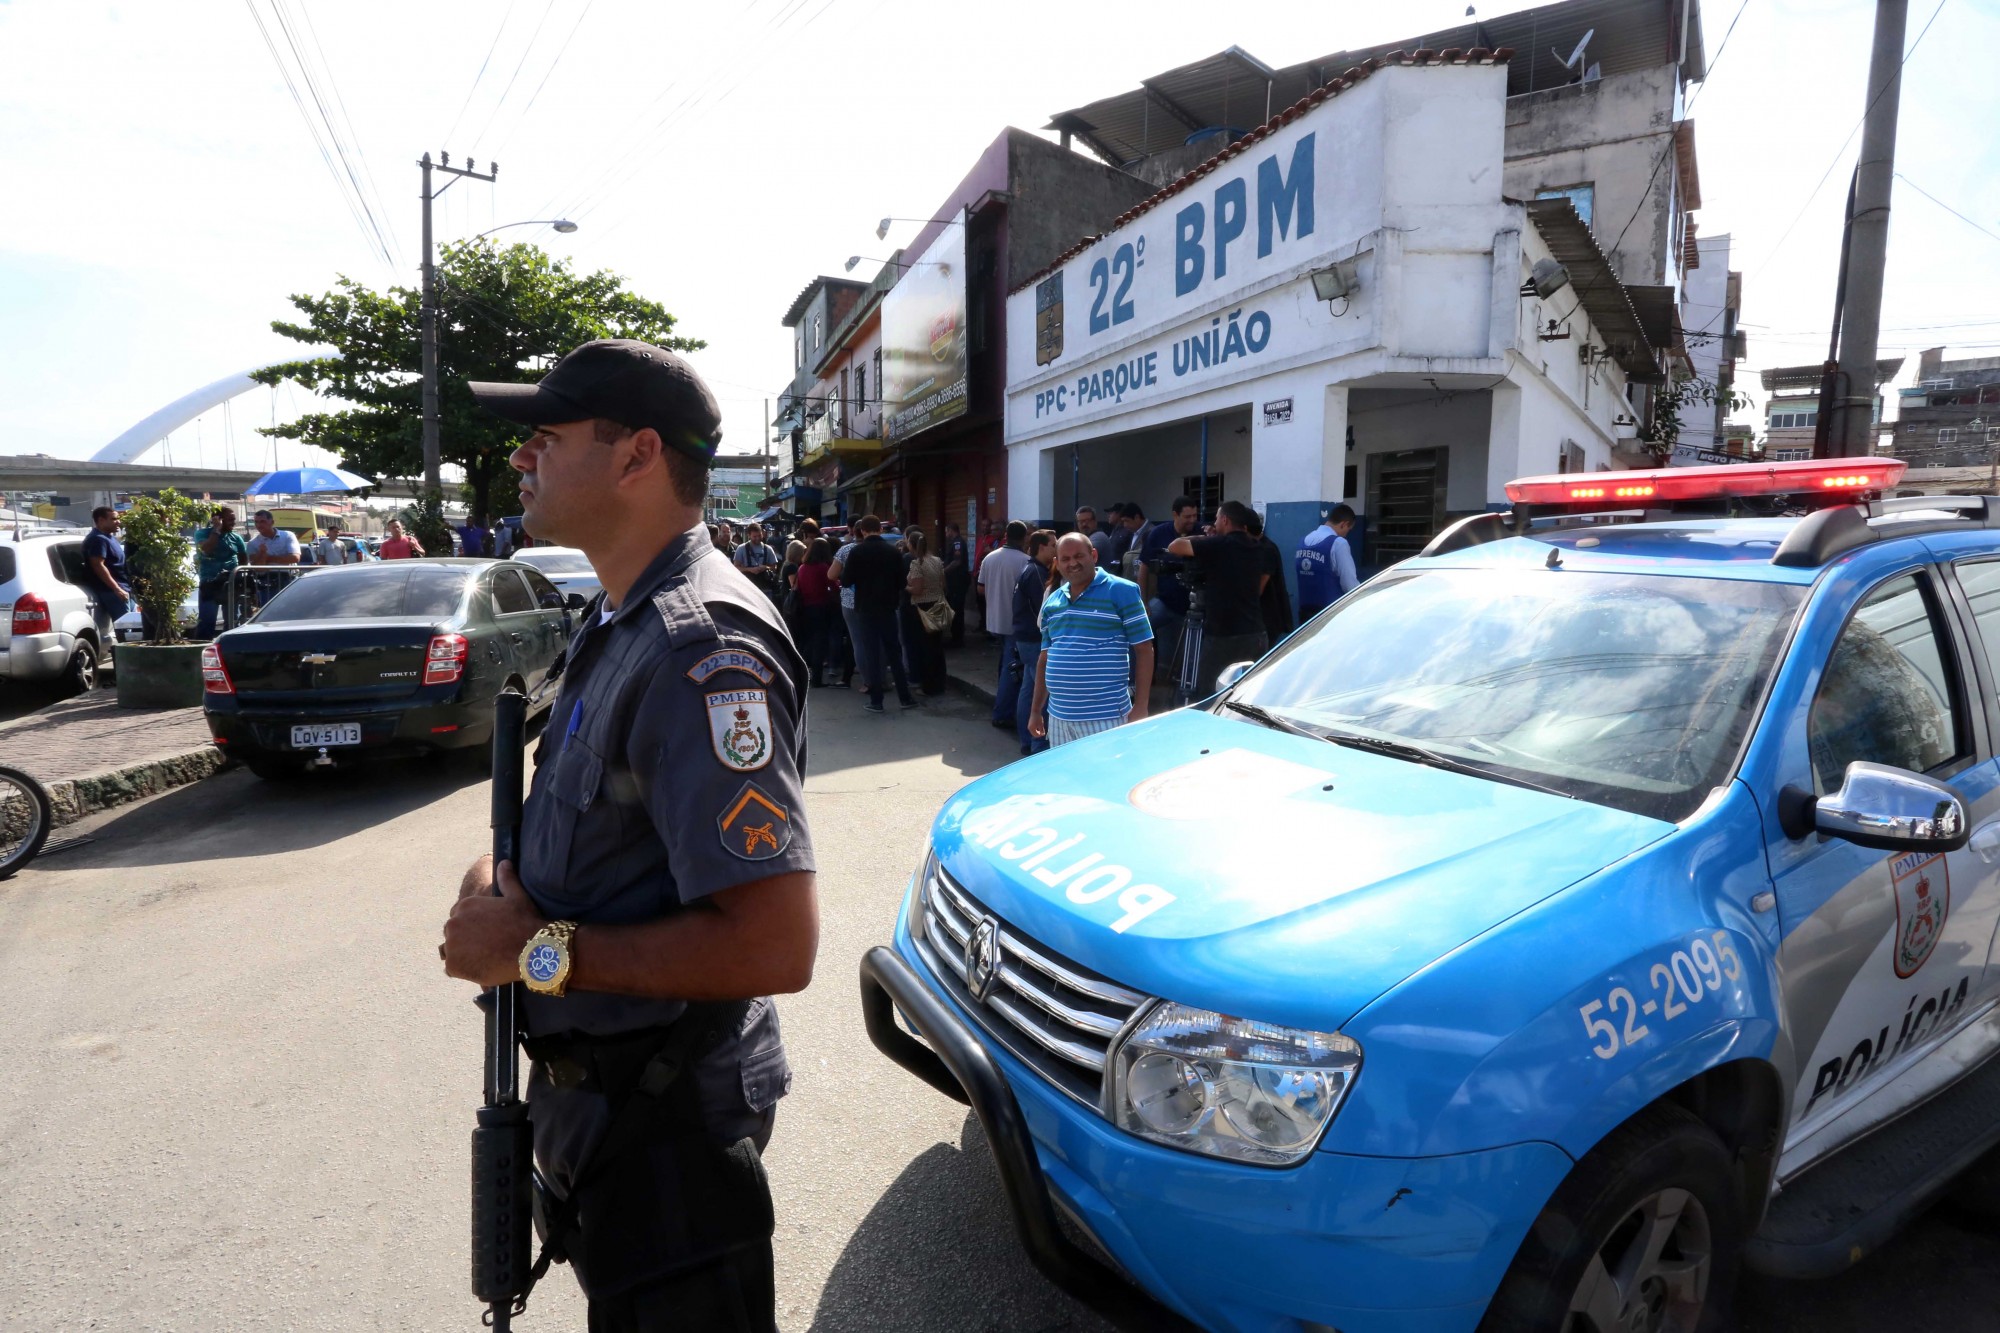 New Police Training Program Aims to Prevent Violence in Rio